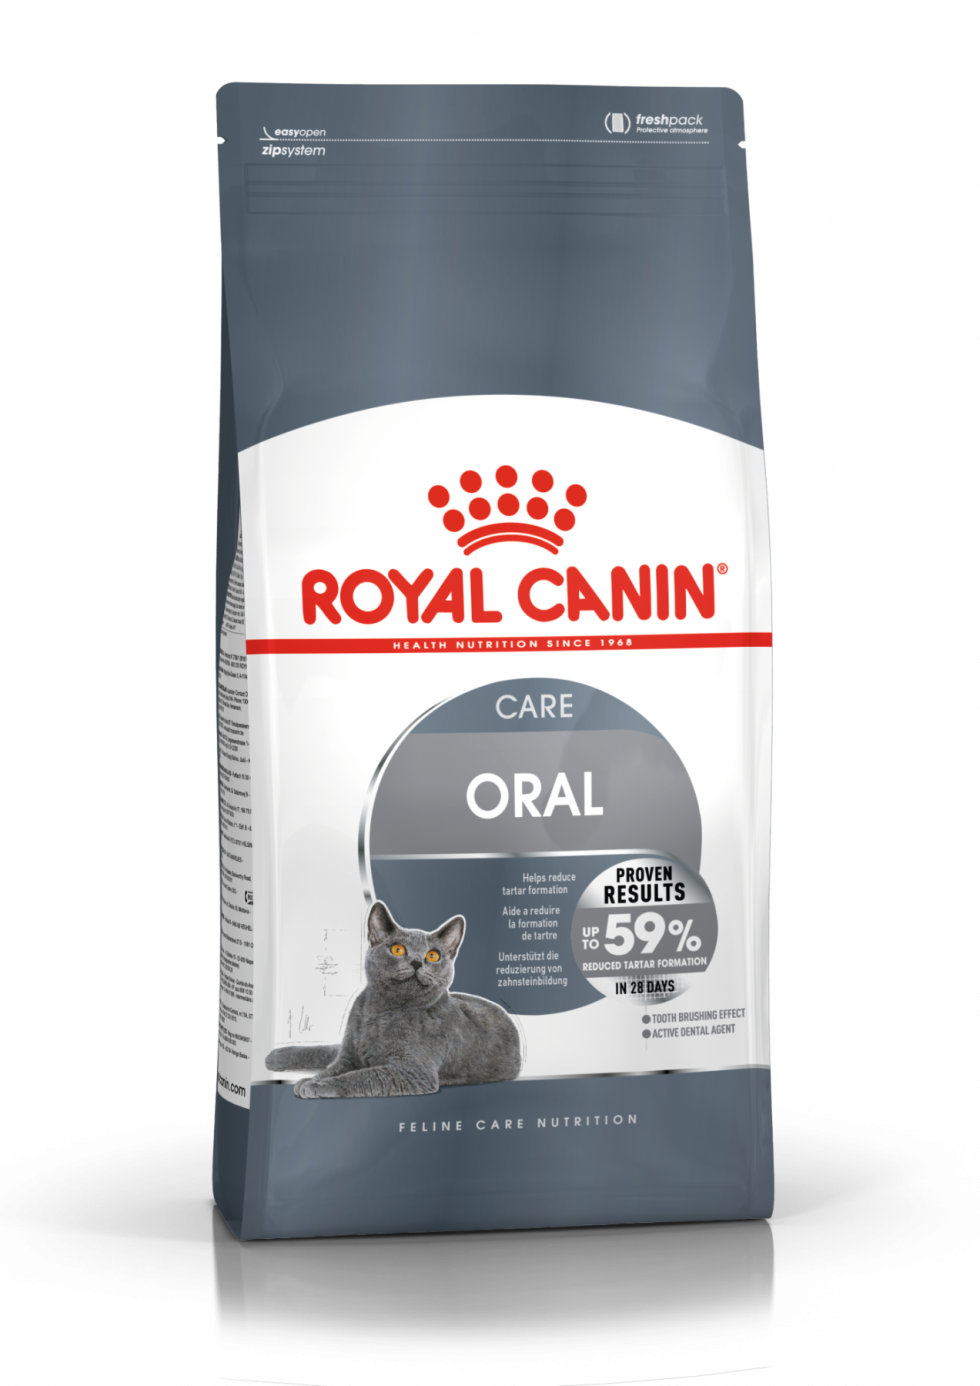 royal-canin-oral-care-